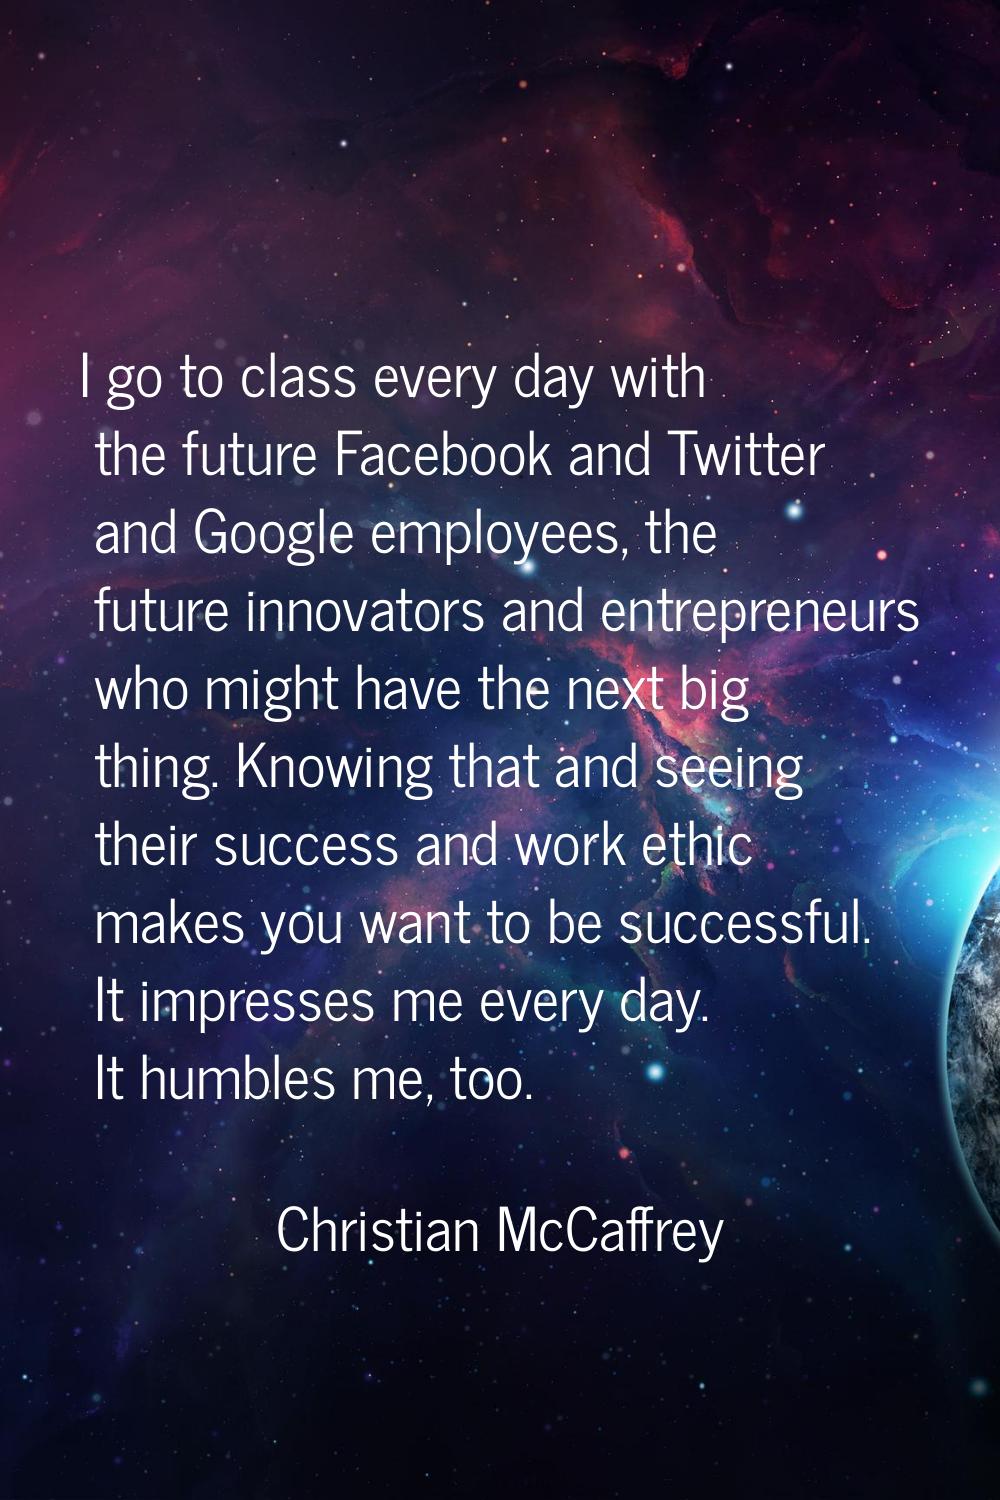 I go to class every day with the future Facebook and Twitter and Google employees, the future innov